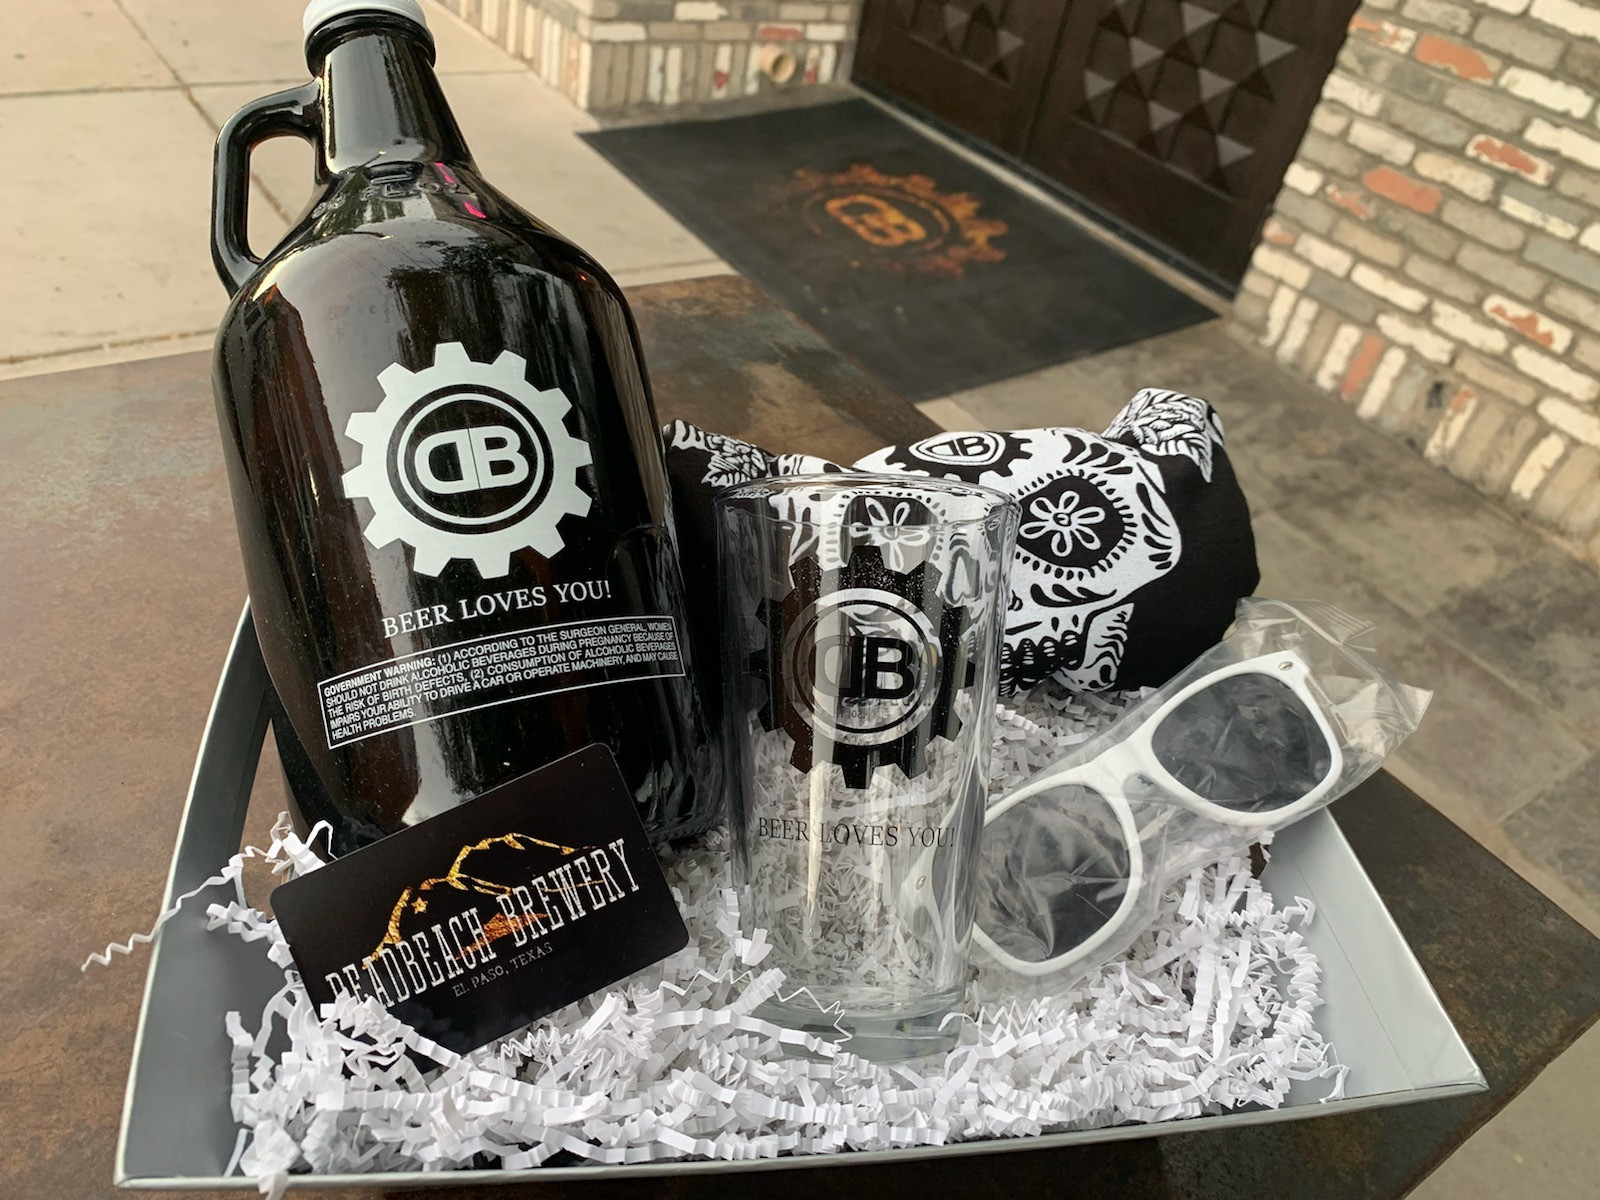 This gift basket if full of adult beverage goodies!